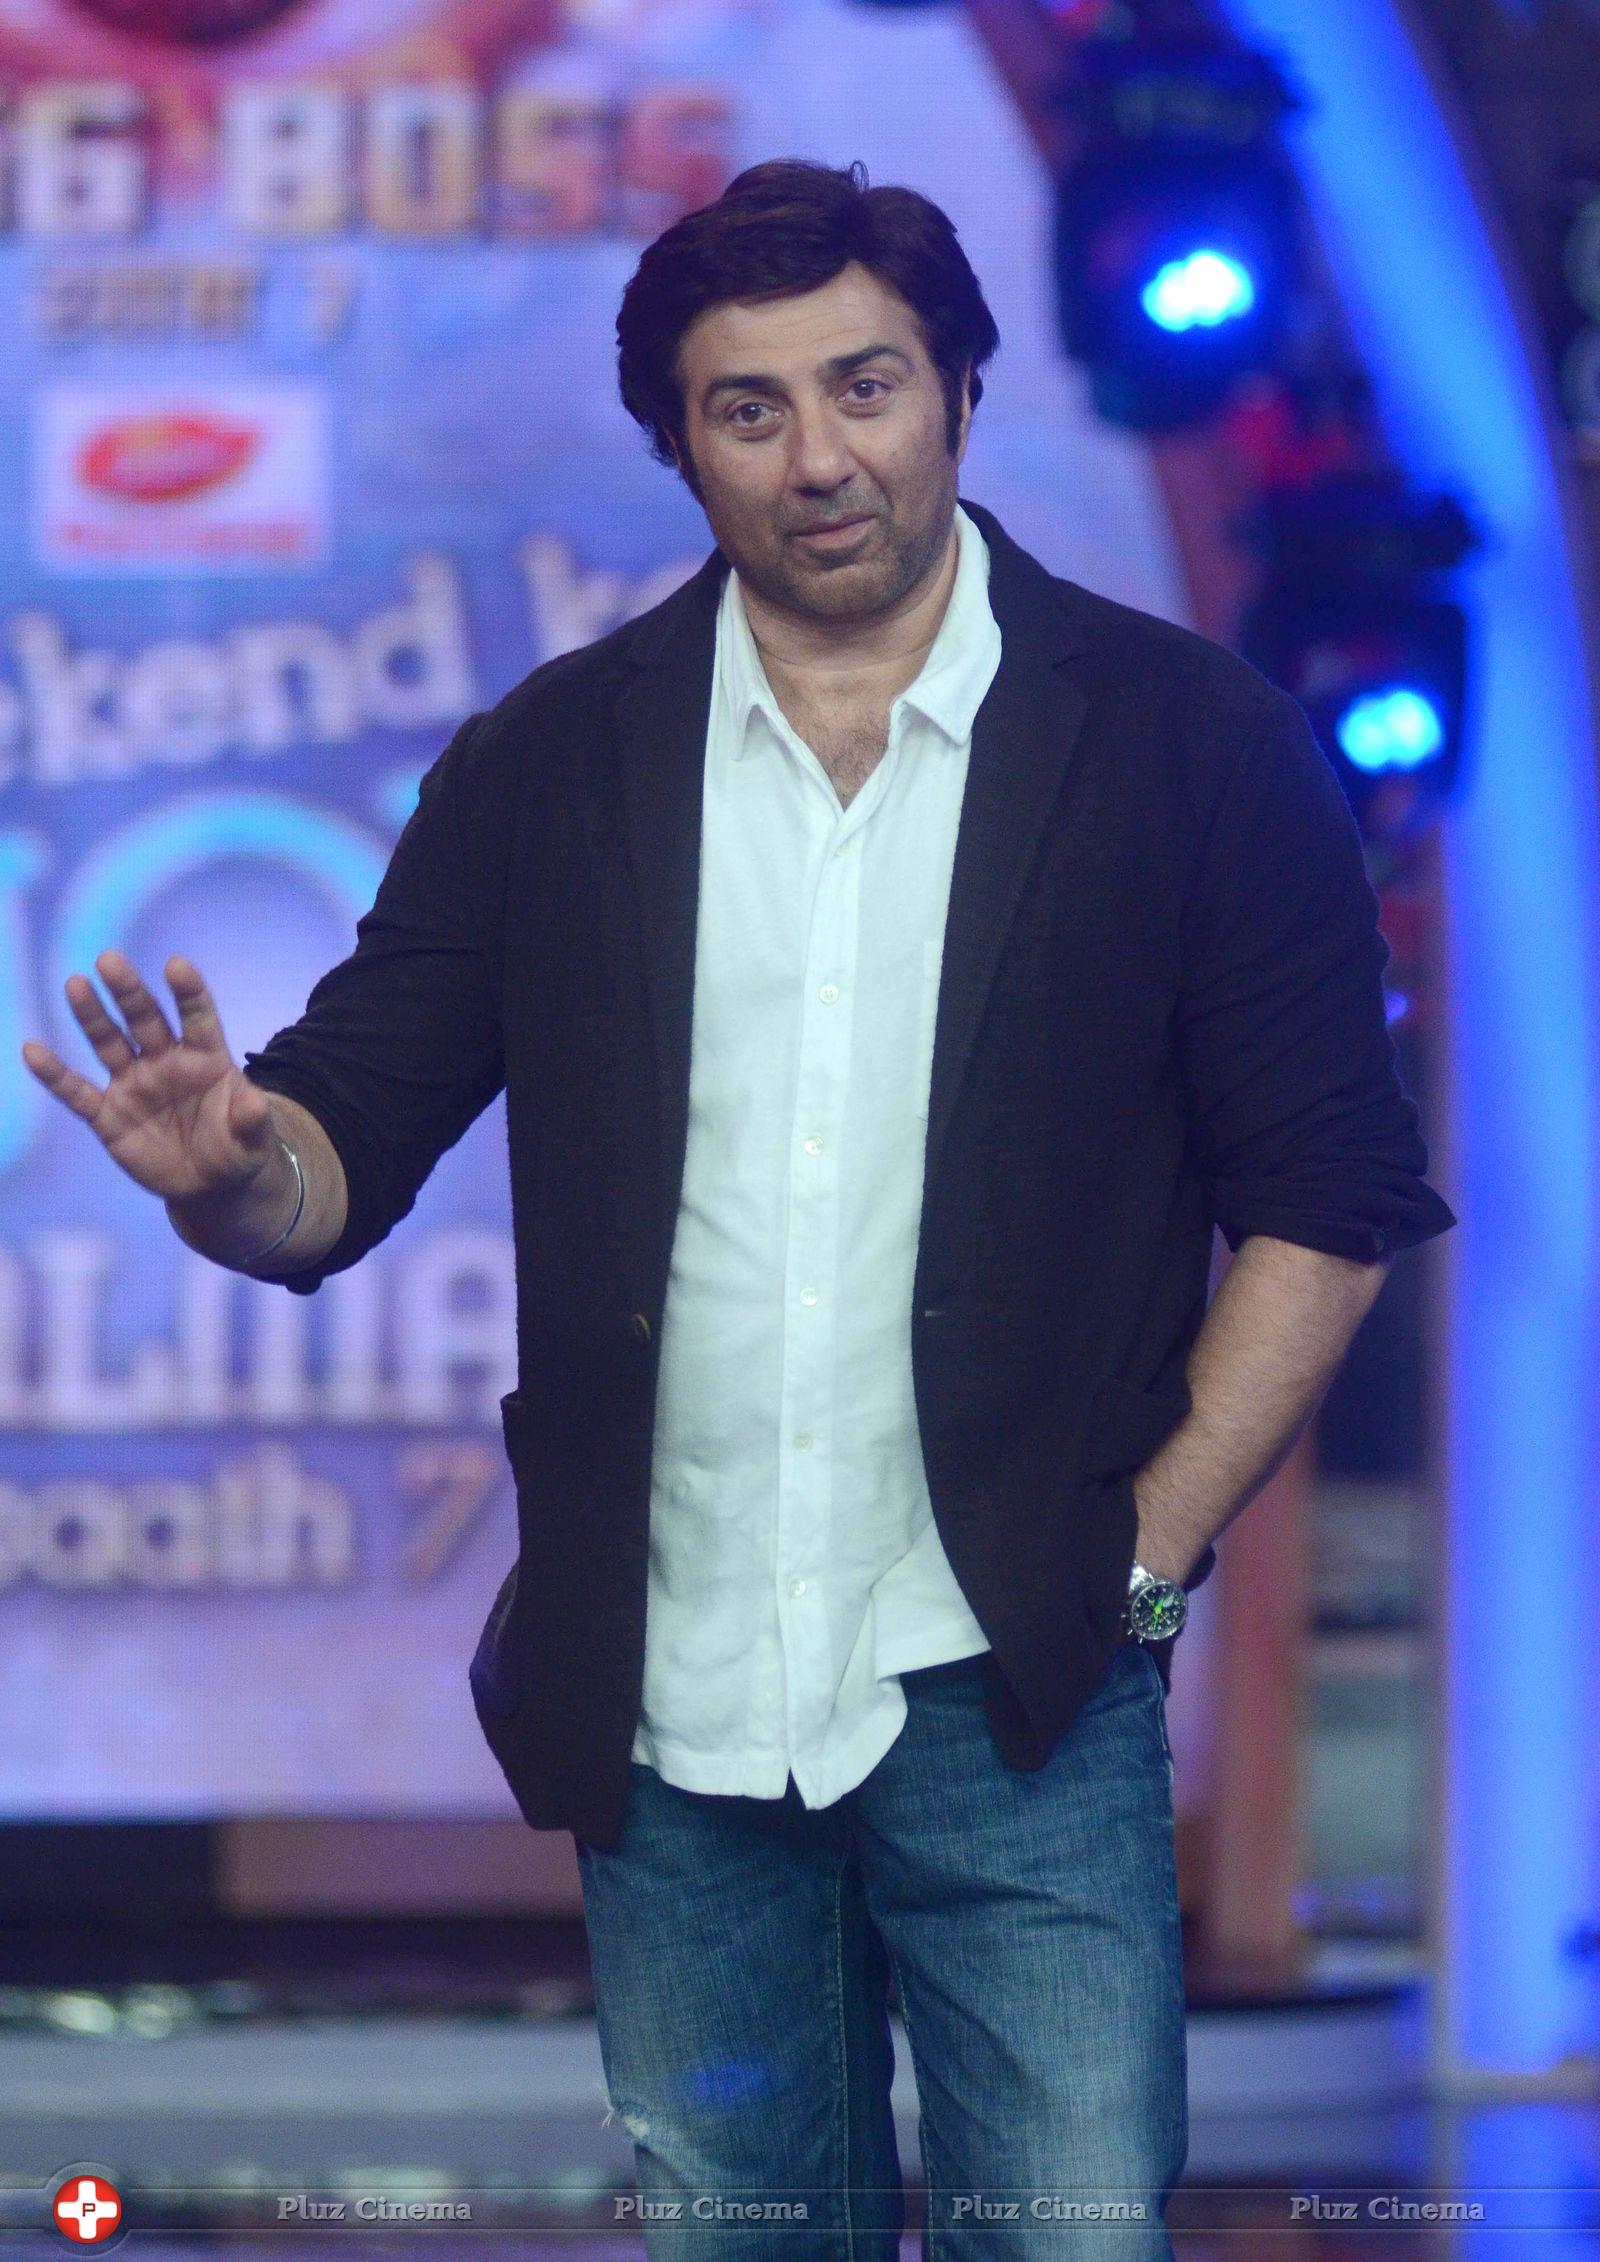 Sunny Deol - Sunny Deol promotes his film Singh Sahab The Great on the sets of Big Boss With Salman Khan Photos | Picture 633456